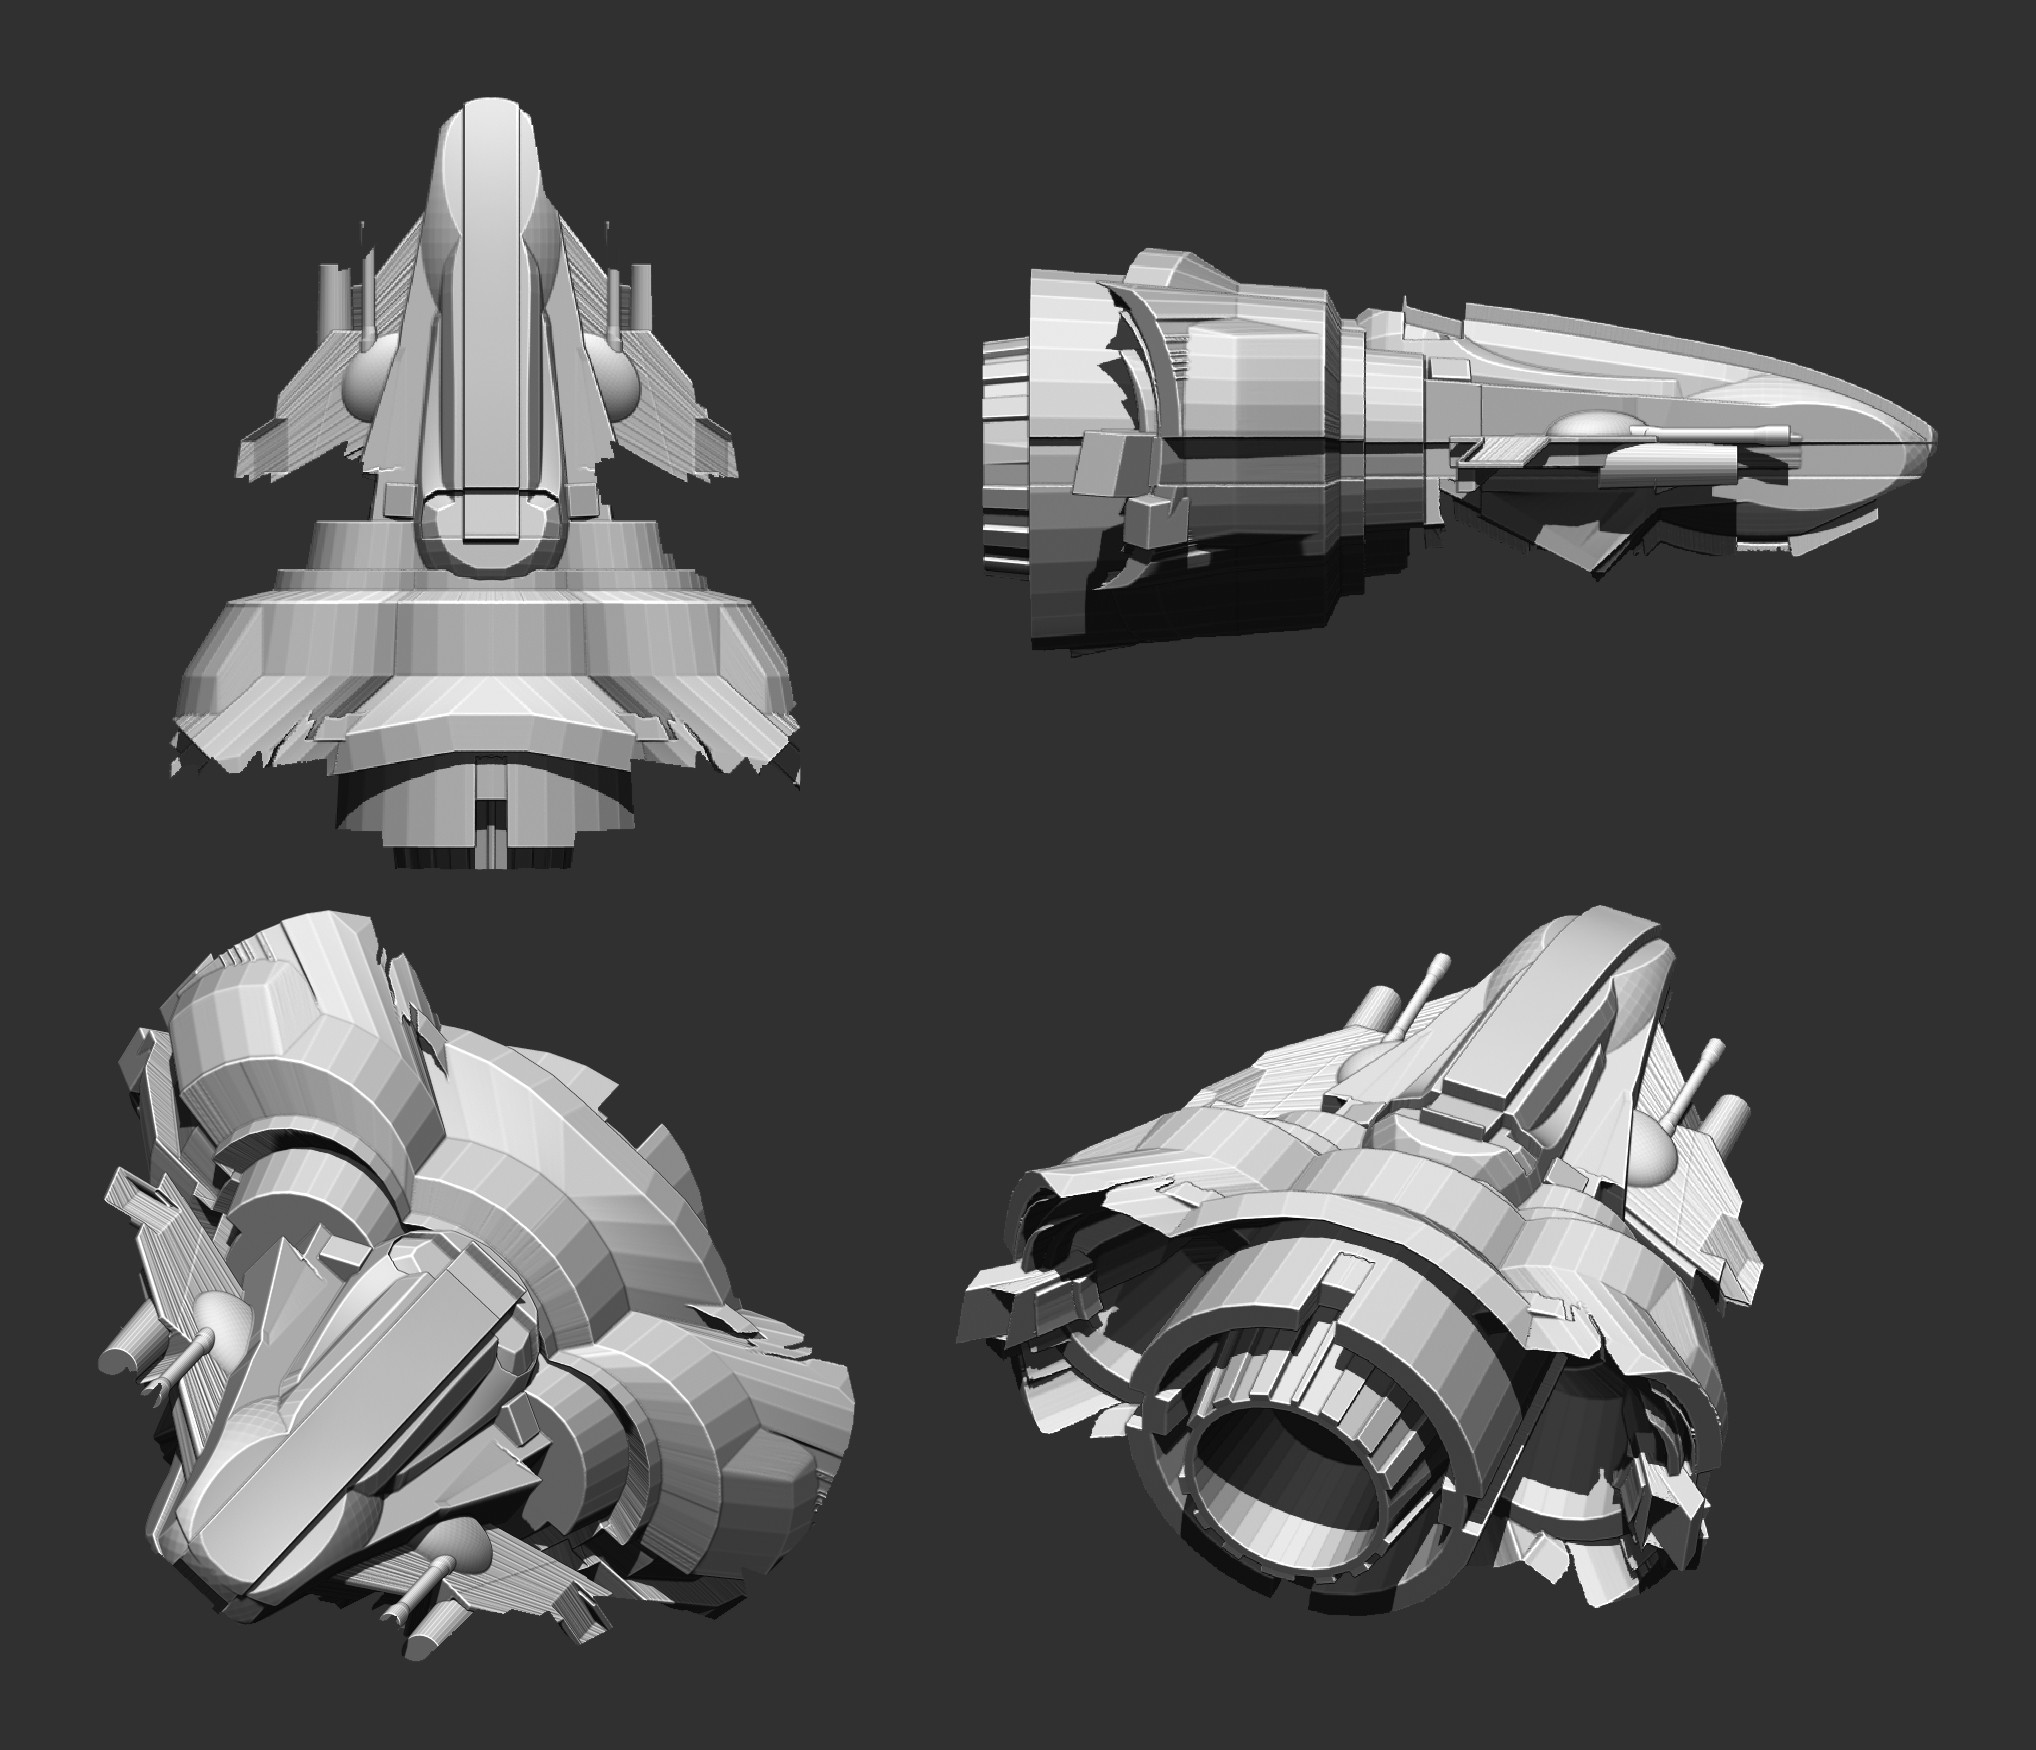 Super rough ship model. I knew the perspective I wanted and just focused on general shapes. 